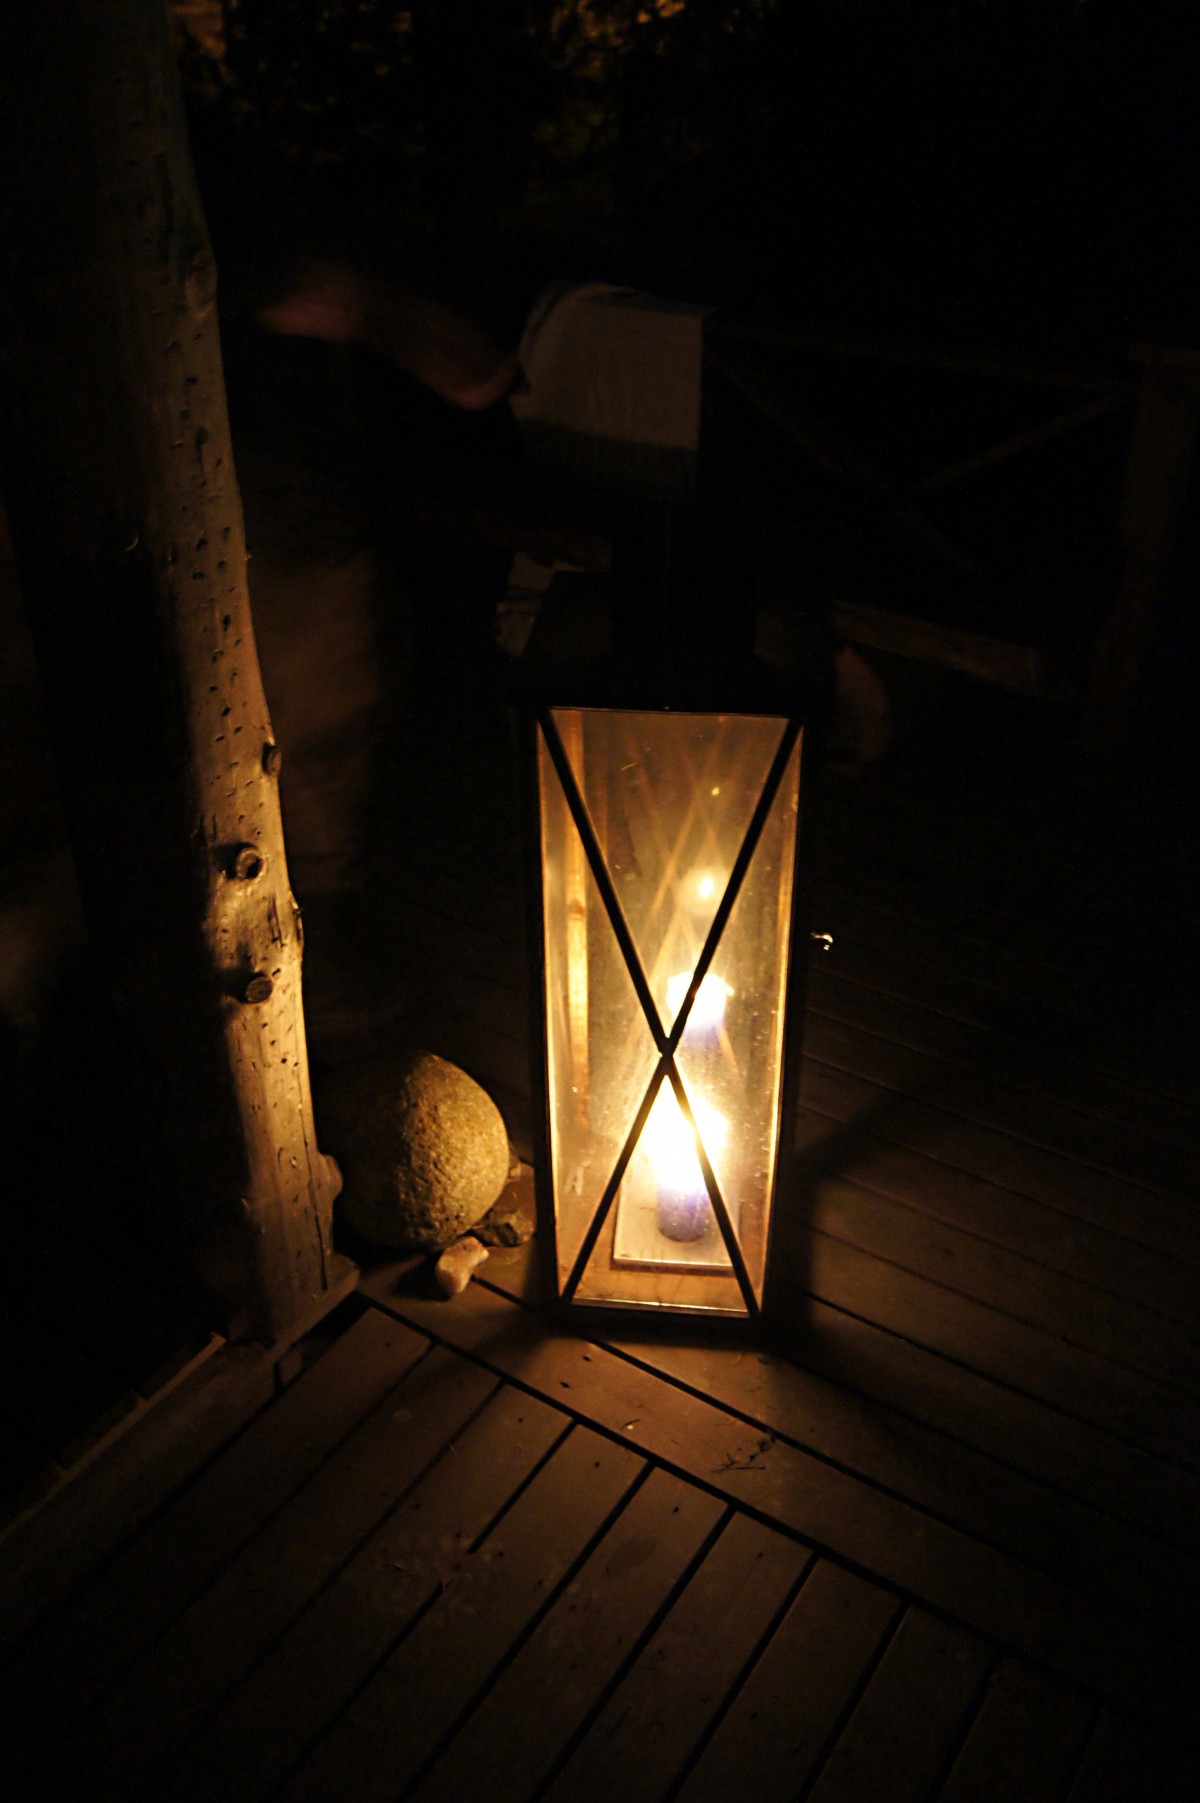 Lantern with a lit candle inside creating a ambient glow